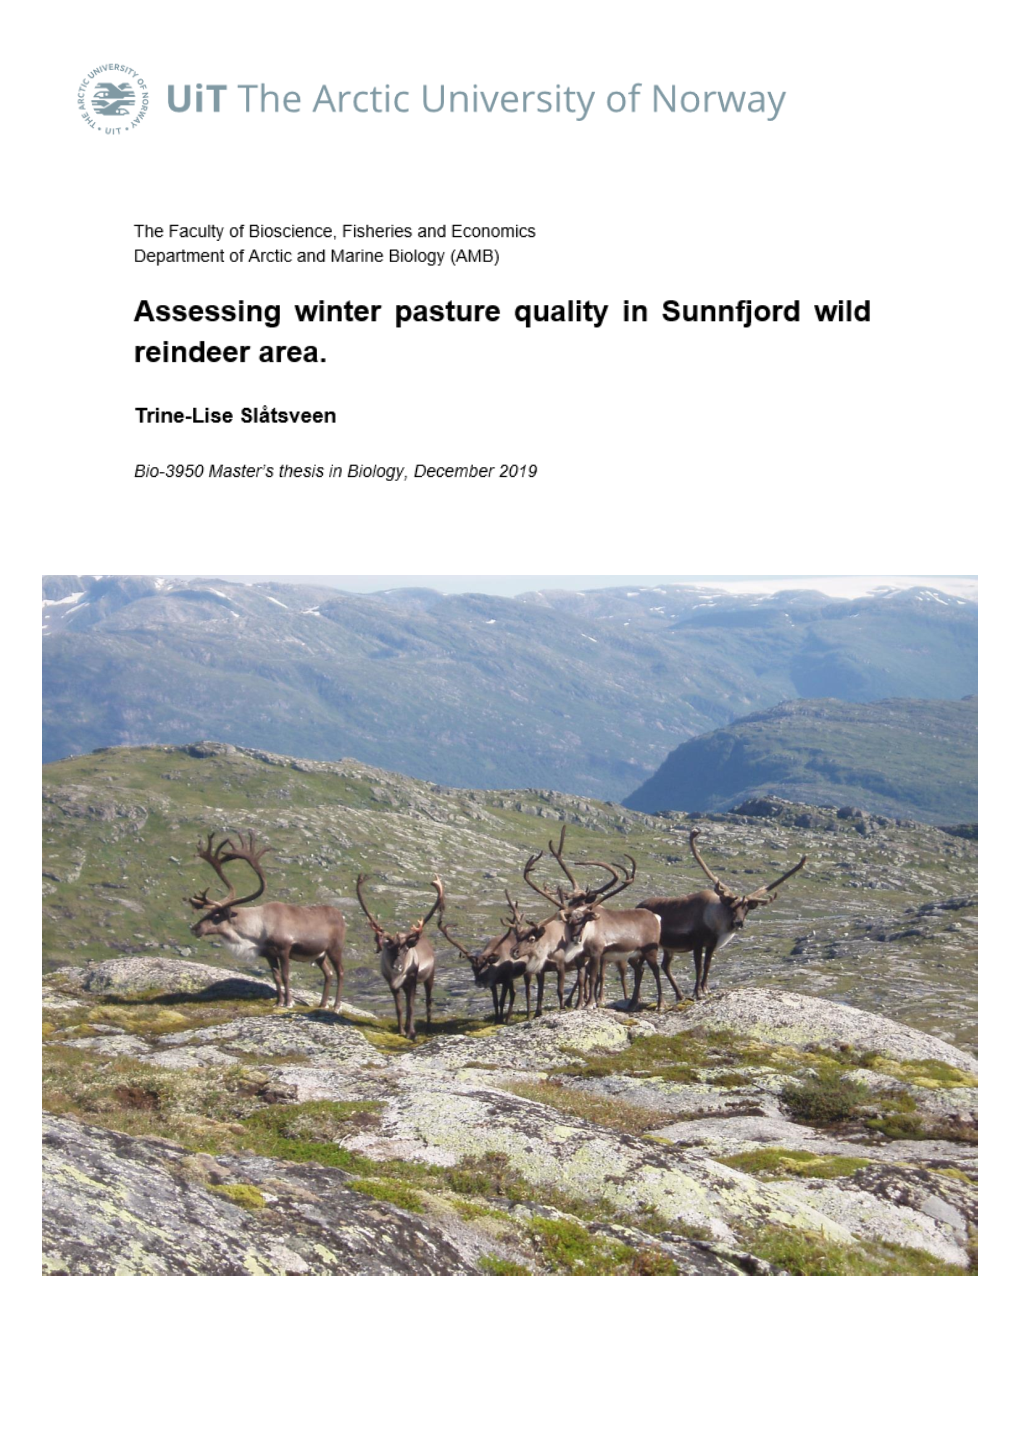 Assessing Winter Pasture Quality in Sunnfjord Wild Reindeer Area